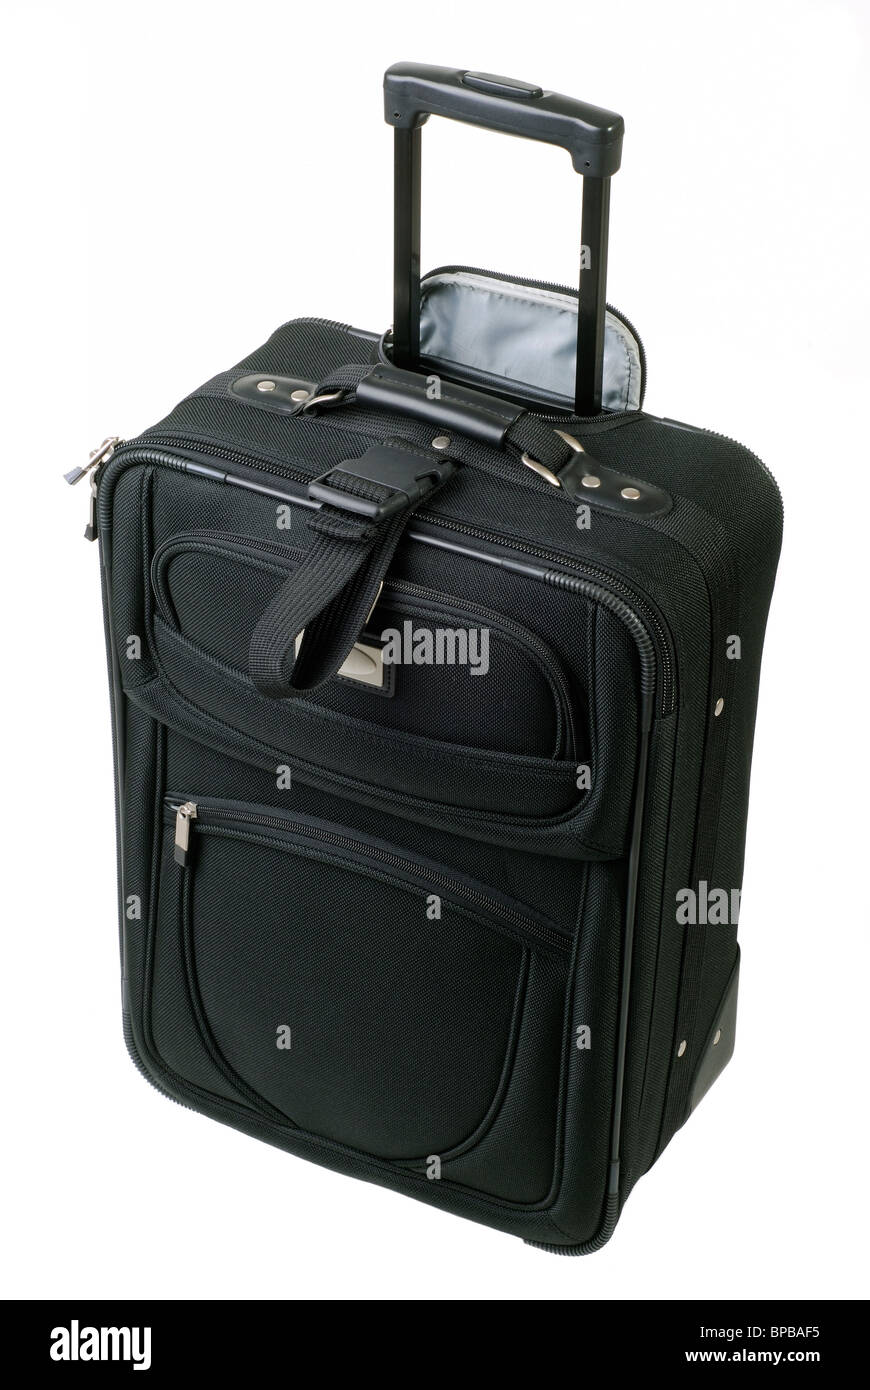 Small Black Carry On Baggage For Air Travel With Wheels And A Folding Handle Stock Photo